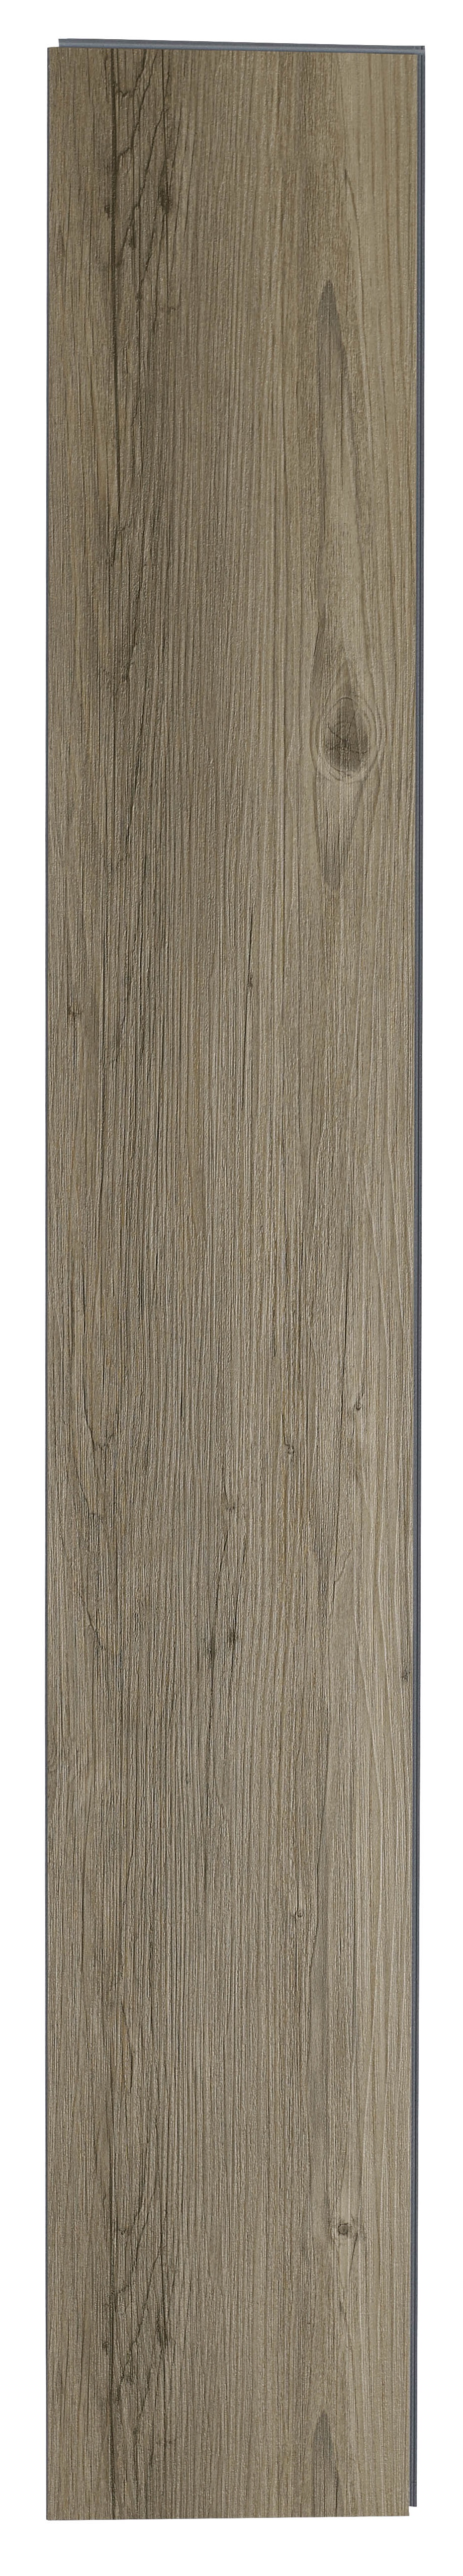 Fitton Rustic Willow Brown SPC Flooring with Integrated Underlay - Sample